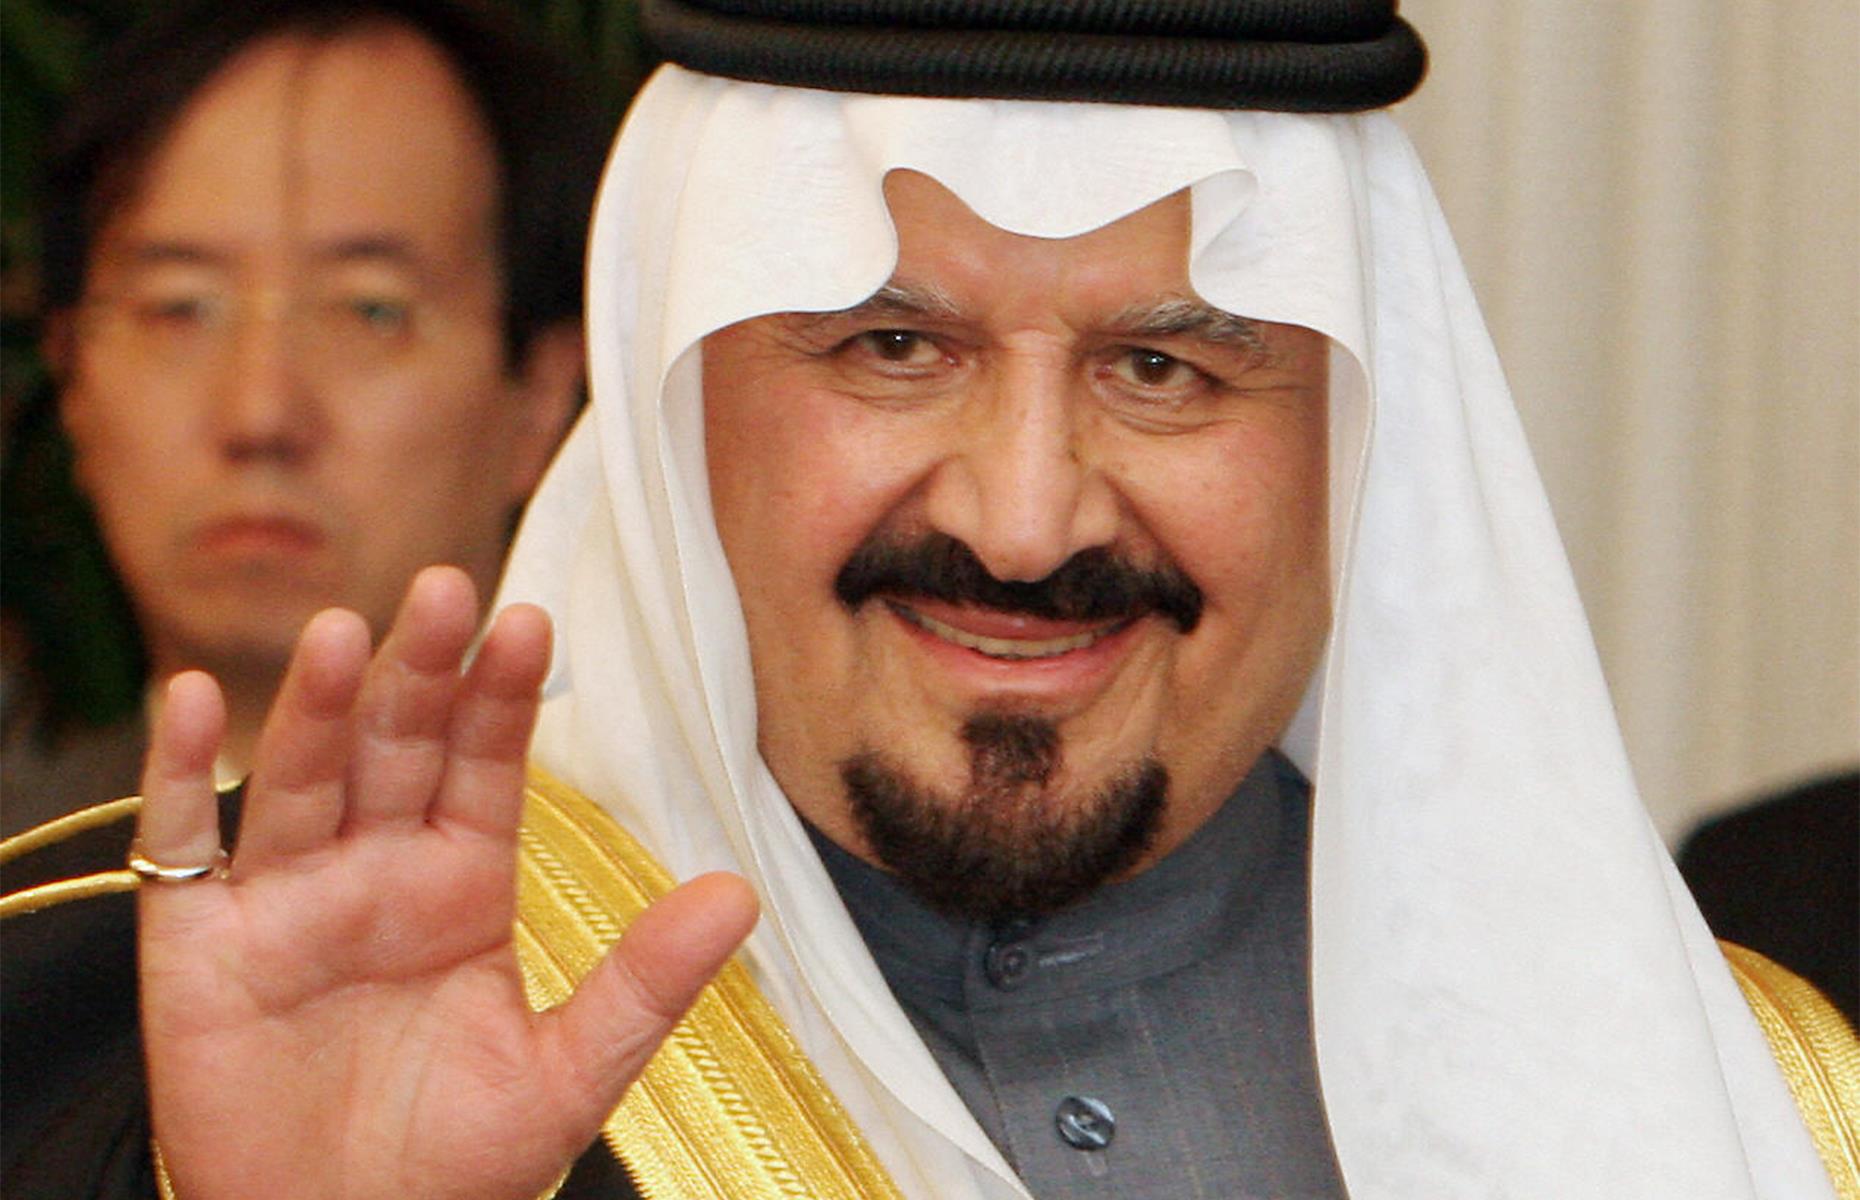 <p>Saudi Arabia's Crown Prince Sultan bin Abdulaziz Al-Saud purchased a Boeing 747-8 to use as his private jet, spending an estimated $284 million on the plane and its custom-designed luxury interiors.</p>  <p>Unfortunately, the heir apparent to the Saudi Crown passed away in 2011, just one year before the jet's scheduled 2012 delivery.</p>